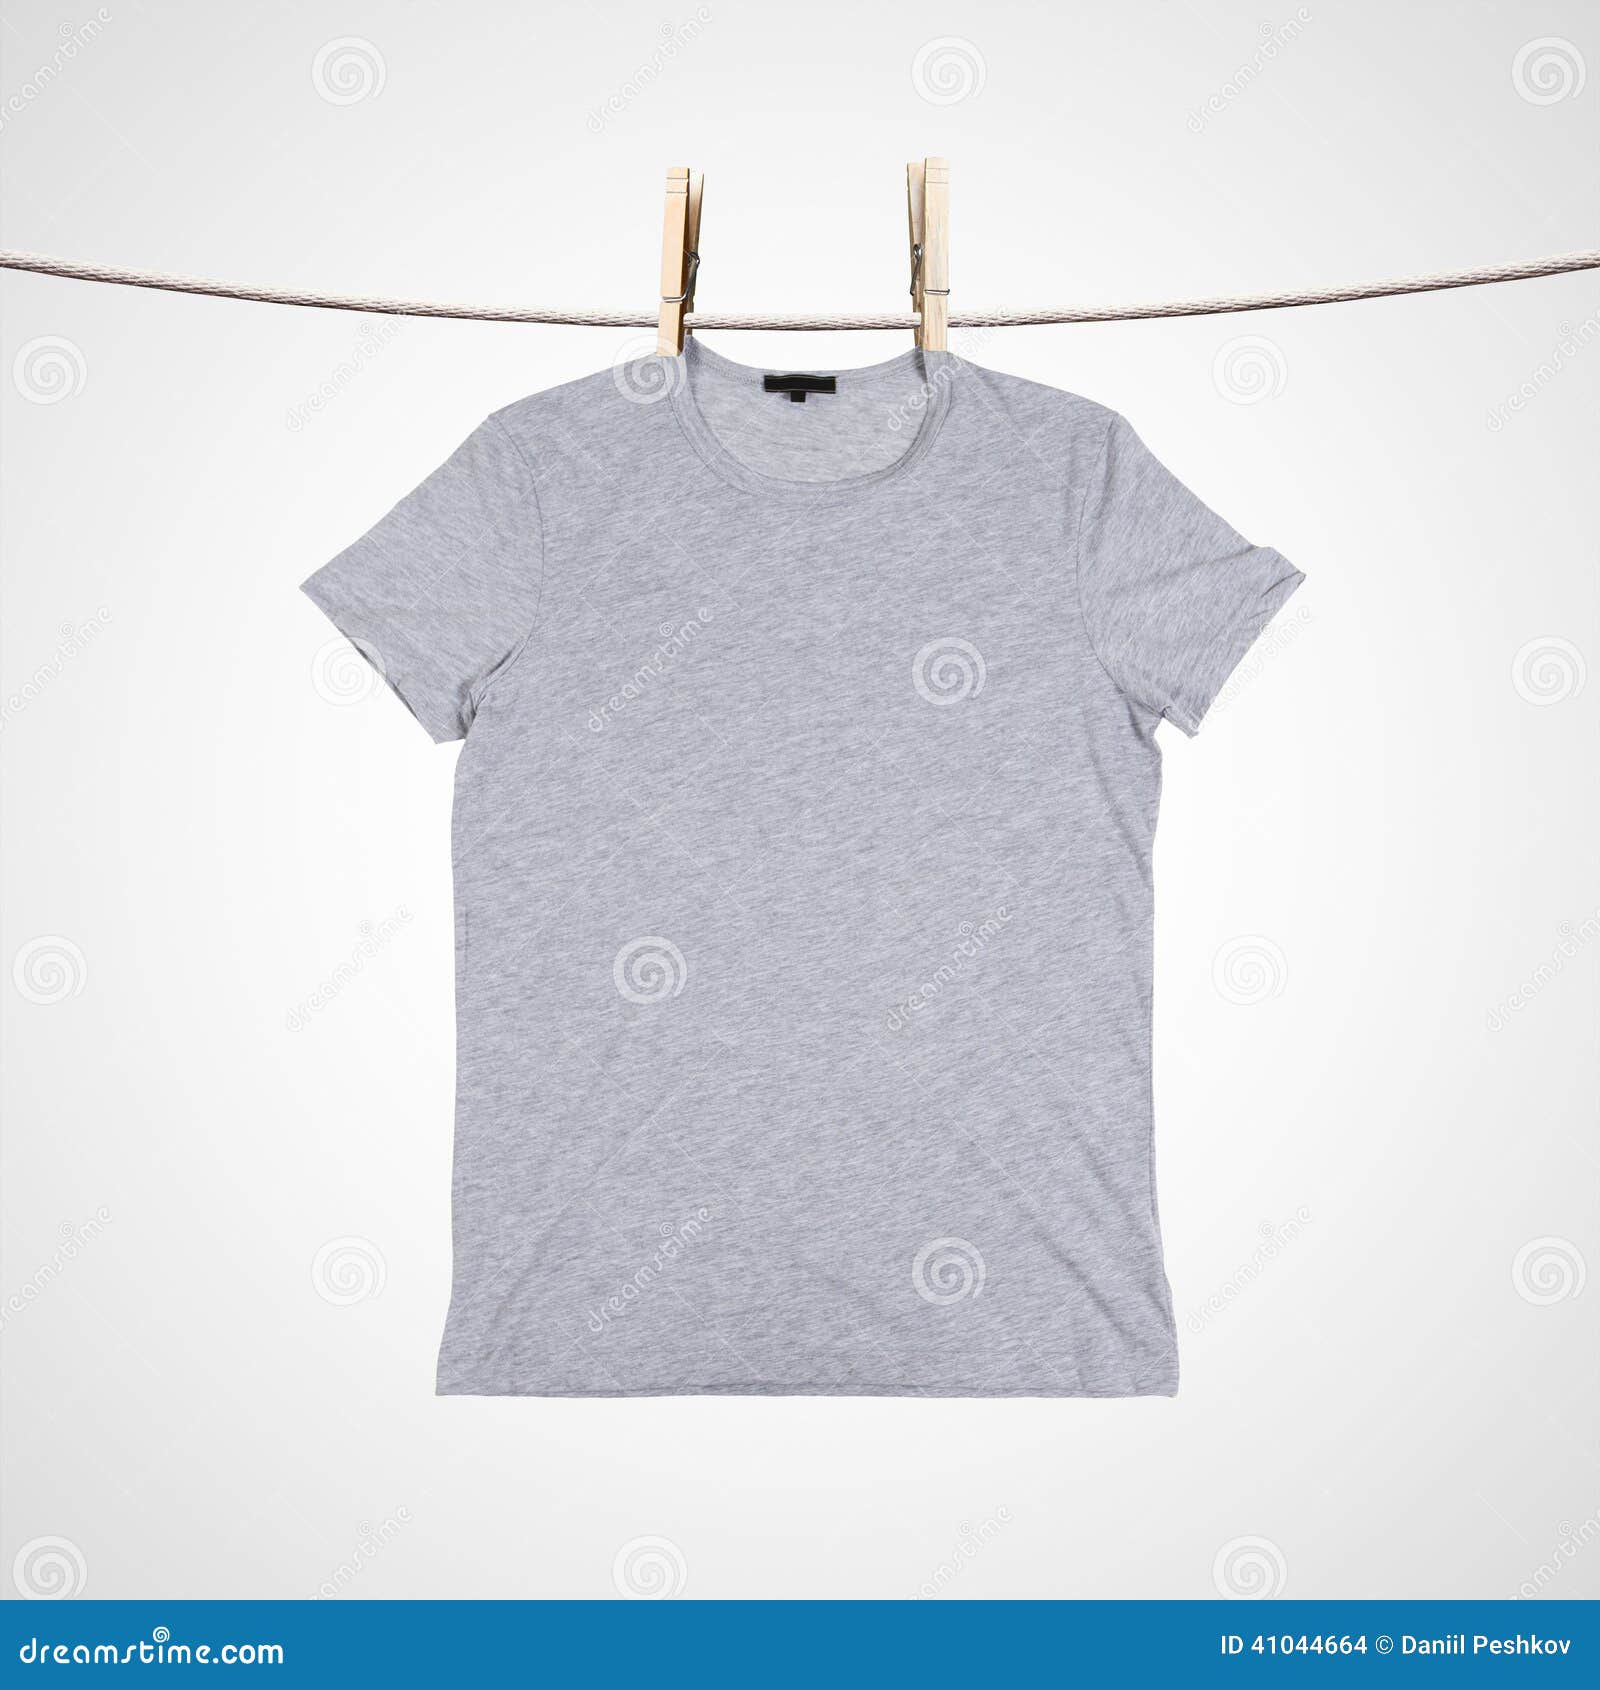 Tshirt on clothesline stock photo. Image of outfit, cotton - 41044664